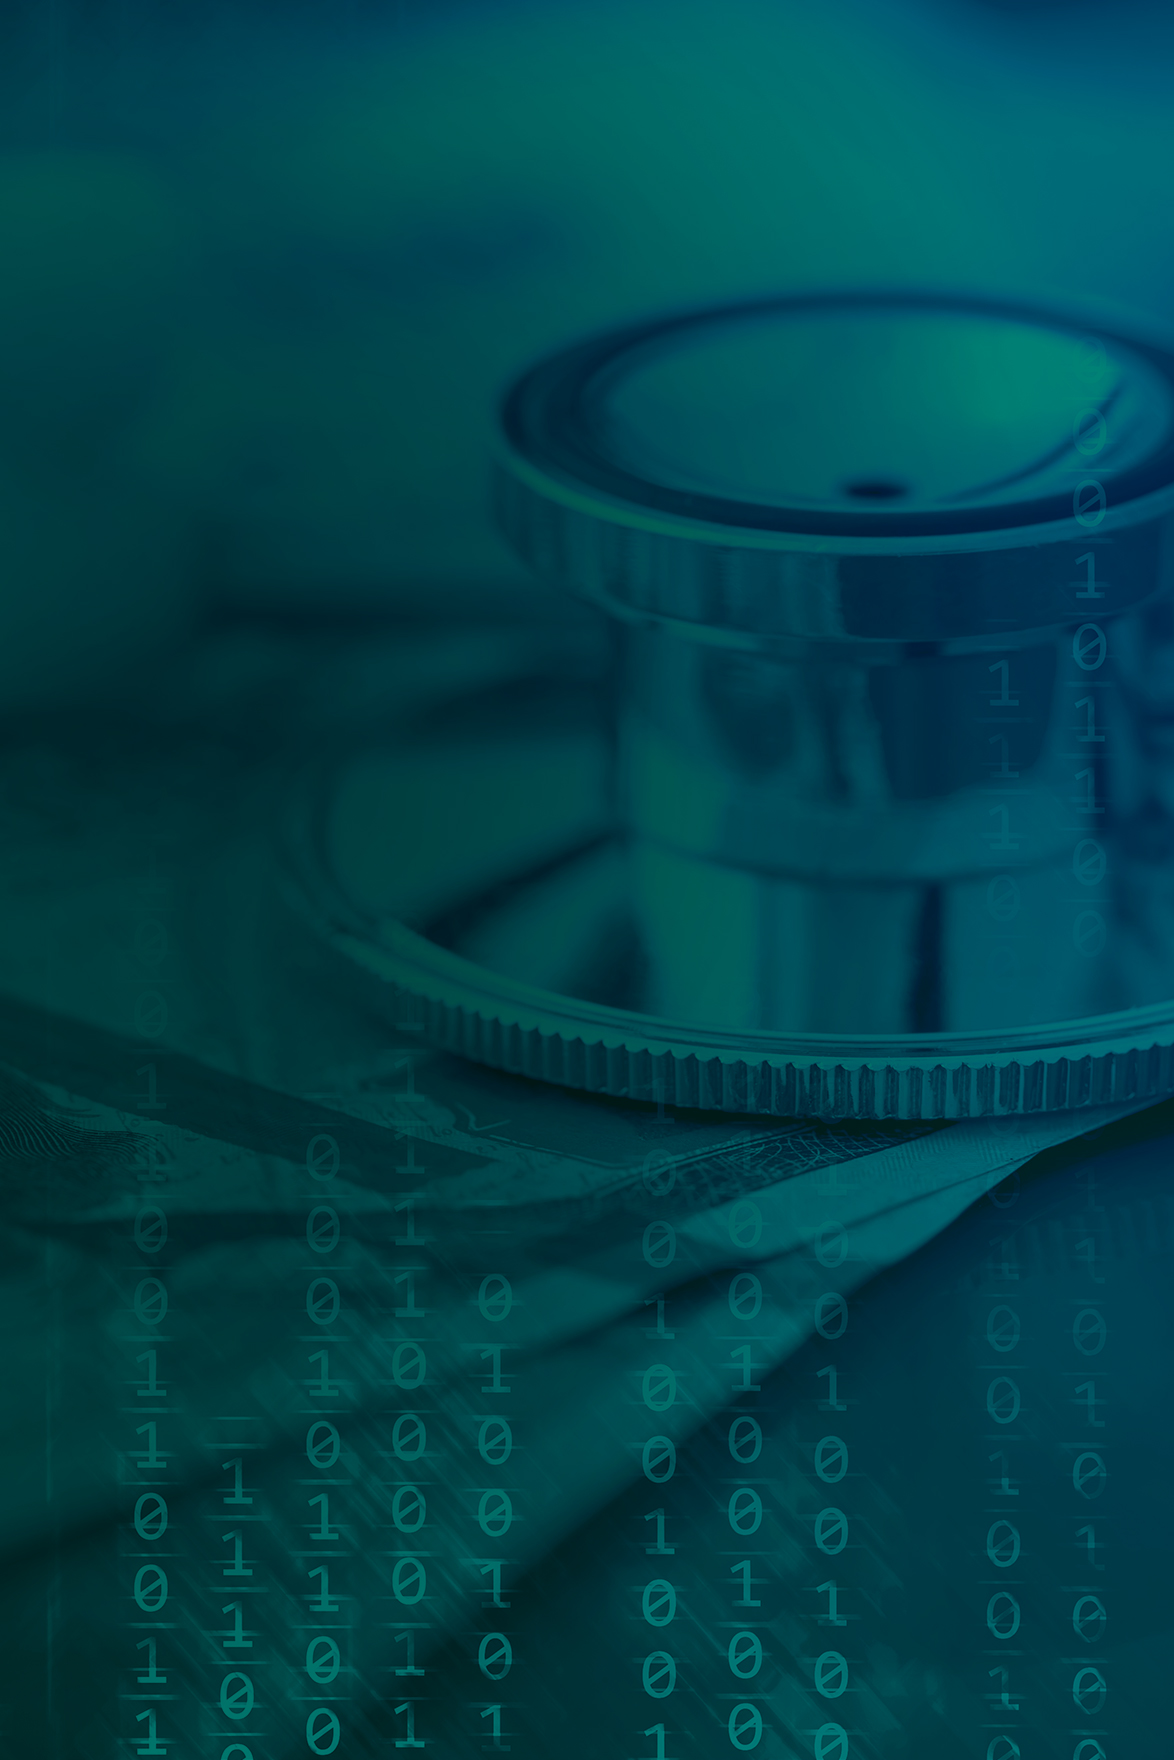 green overlay over image of close up of stethoscope and binary code